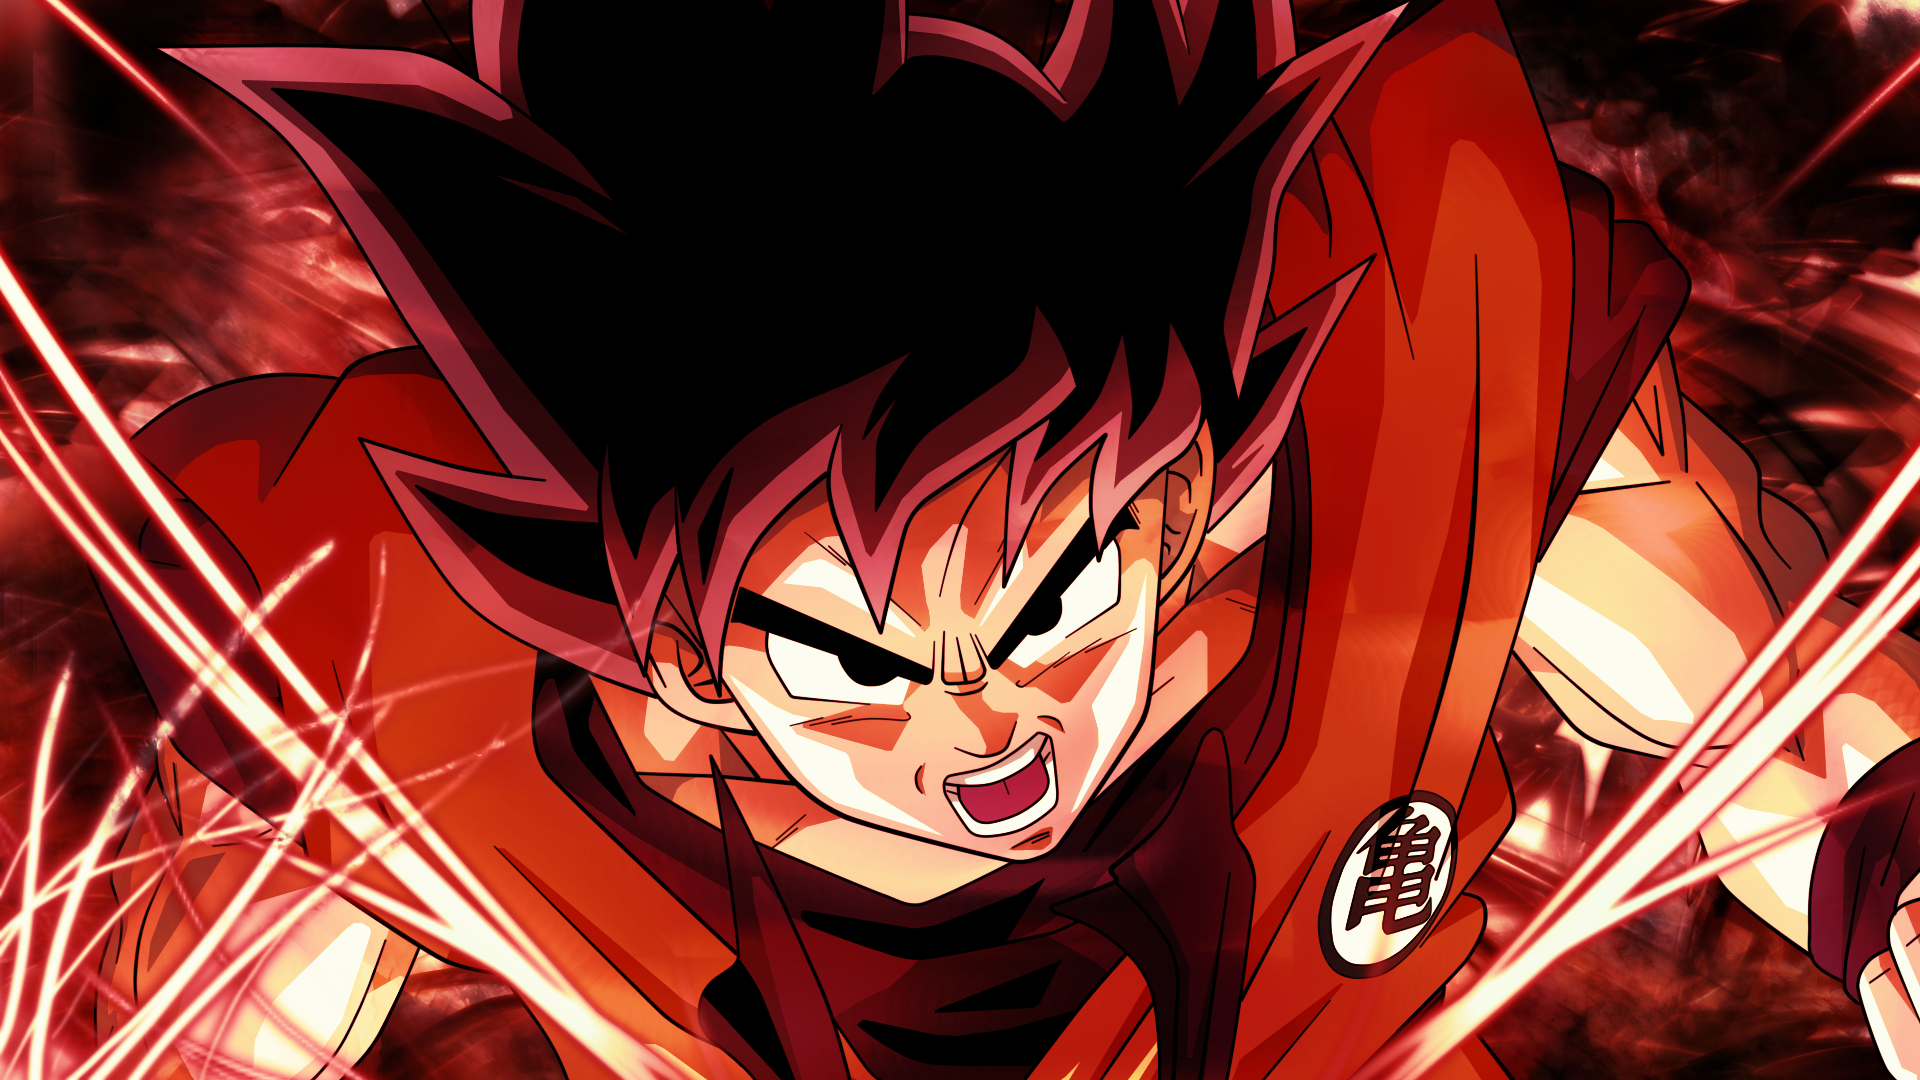 Kid goku wallpaper by AnbuCapalot  Download on ZEDGE  ccd8